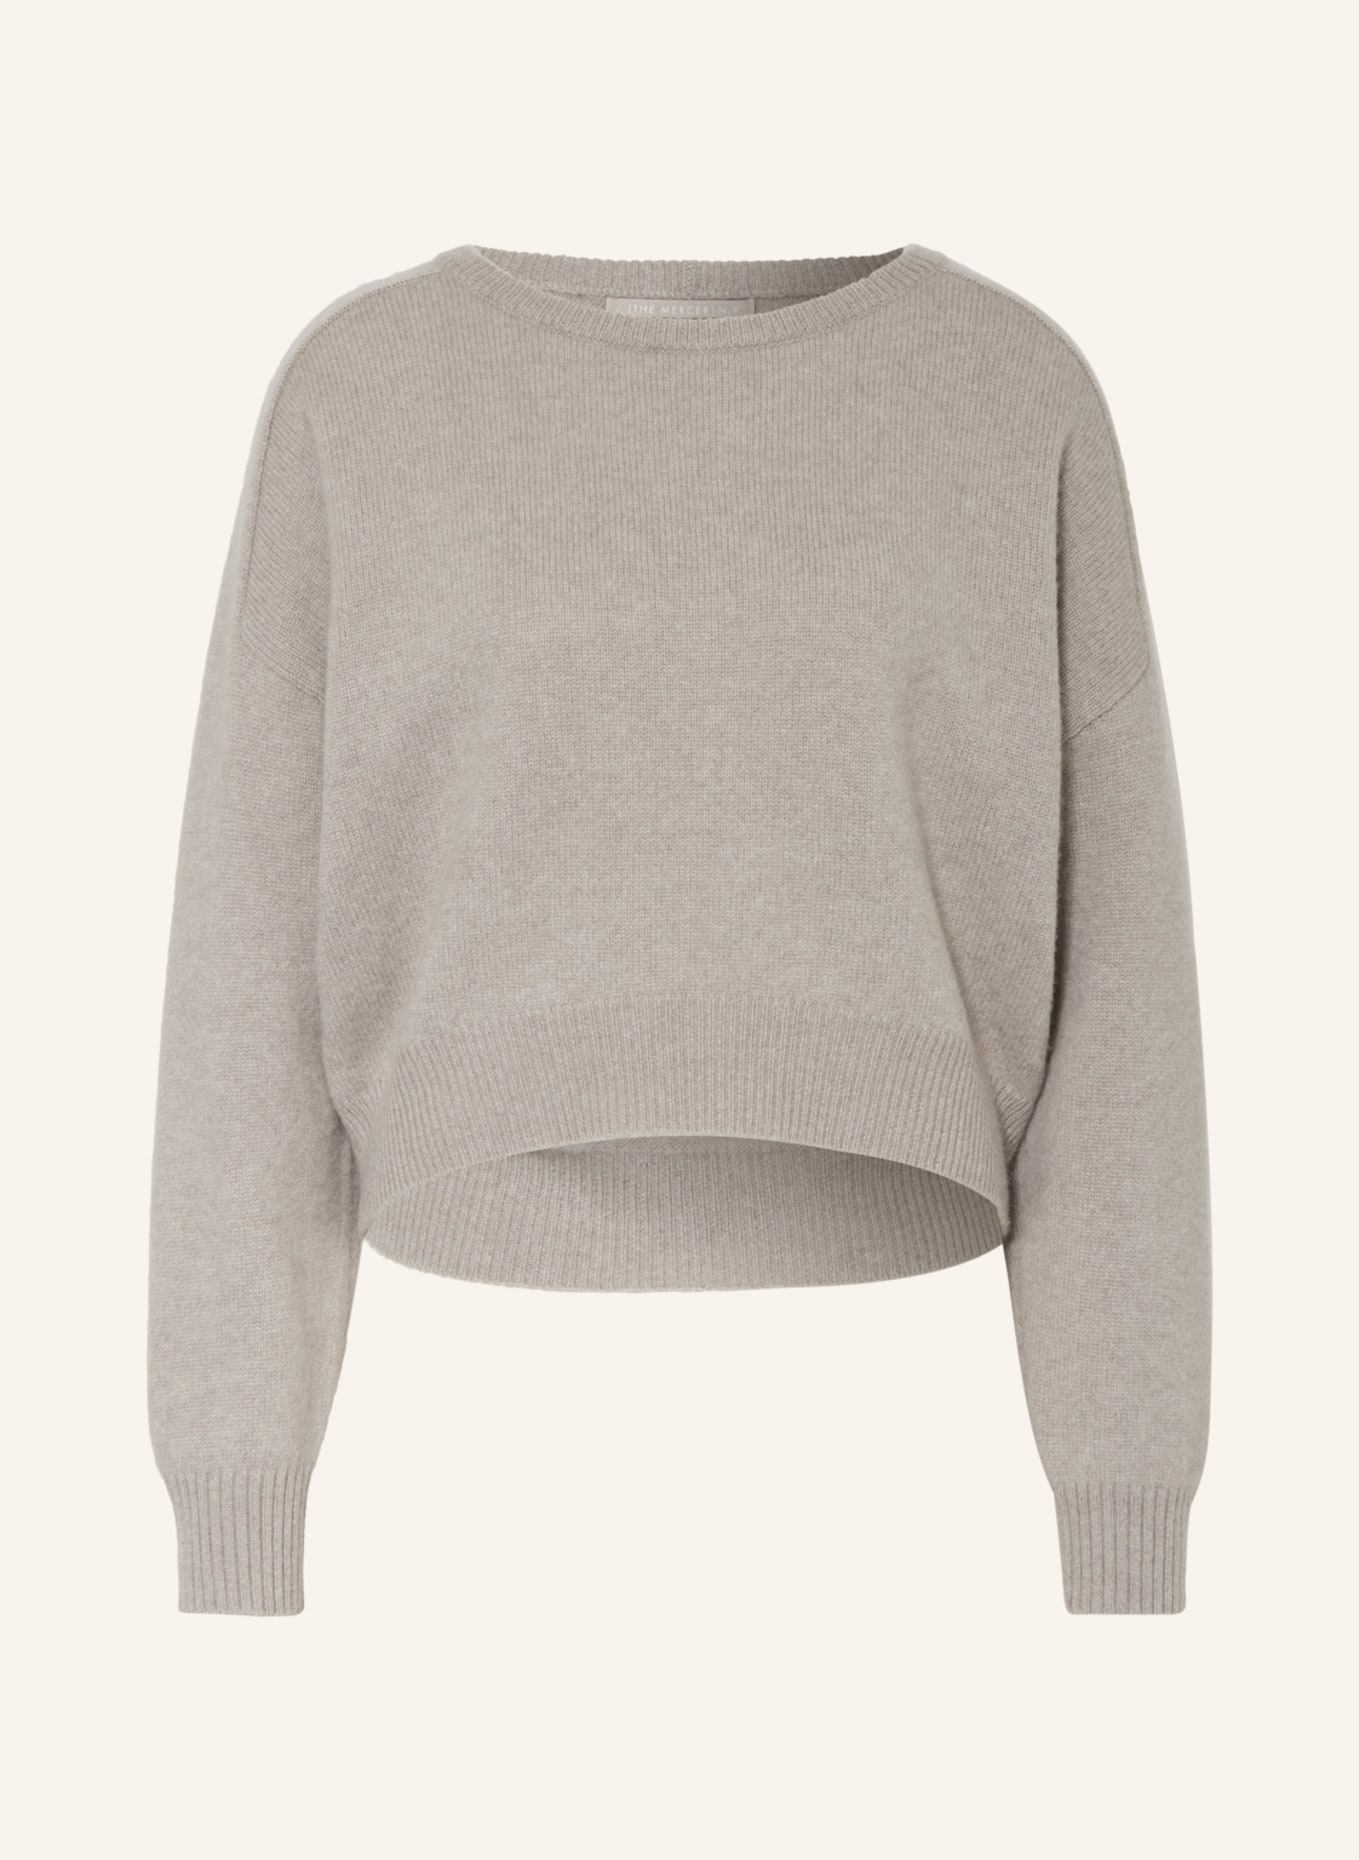 (THE MERCER) N.Y. Cashmere-Pullover, Farbe: TAUPE (Bild 1)